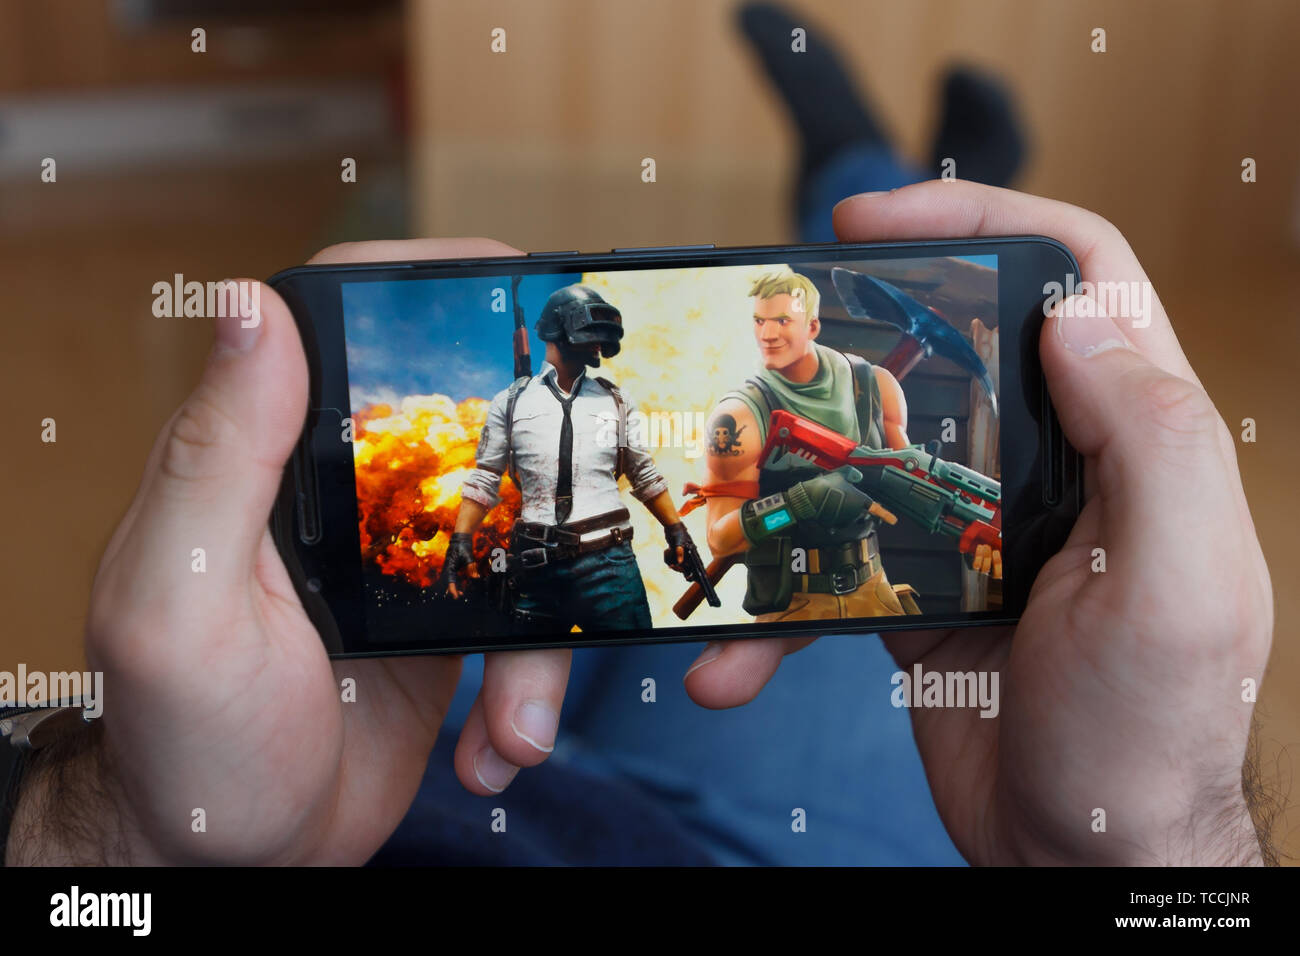 LOS ANGELES, CALIFORNIA - JUNE 3, 2019: Lying Man holding a smartphone and compares PUBG and Fortnite games on the smartphone screen. An illustrative  Stock Photo